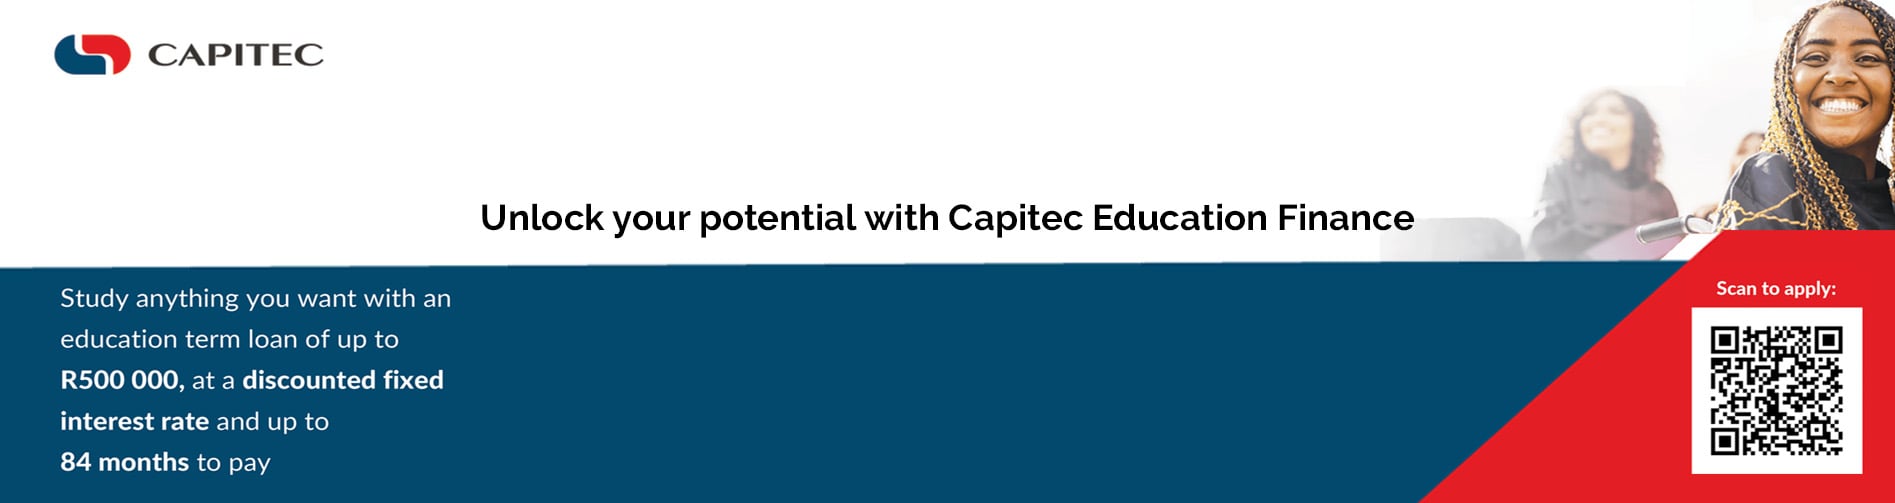 Unlock your potential with Capitec Education Finance